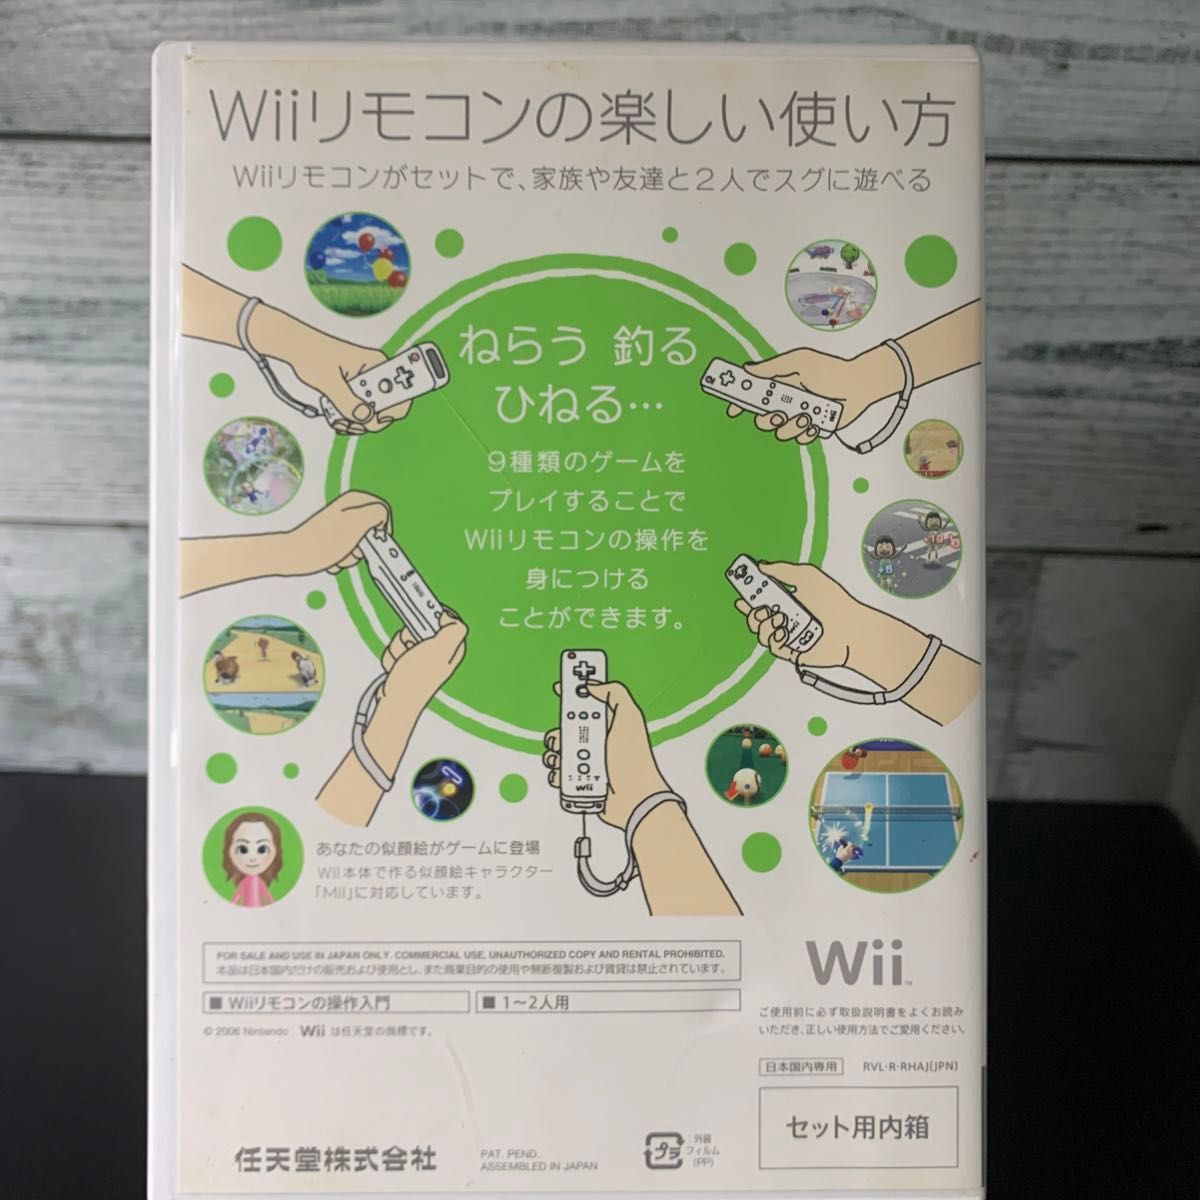 Wiiソフト はじめてのWii